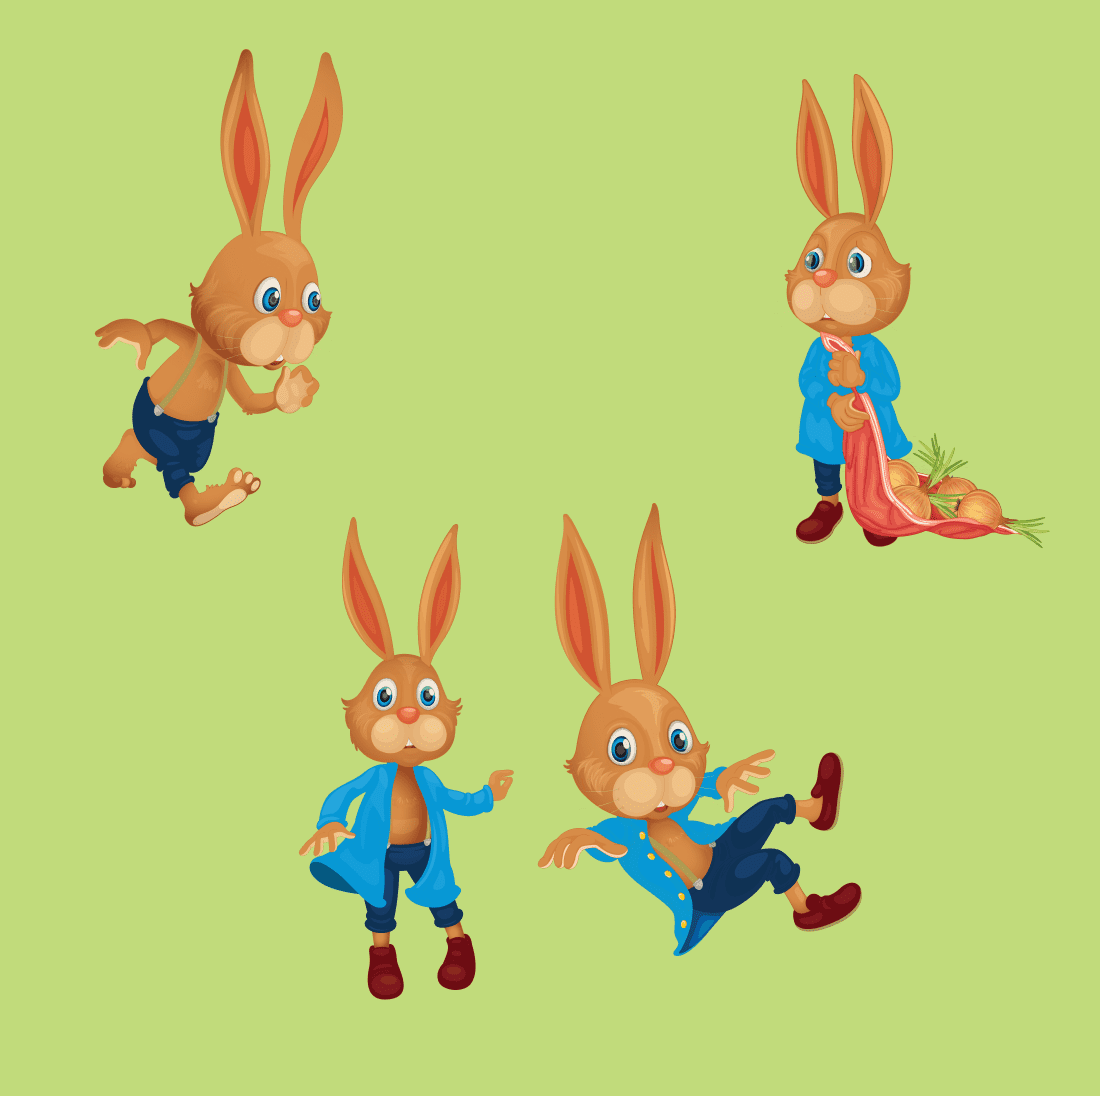 Set of three cartoon rabbits with different poses.